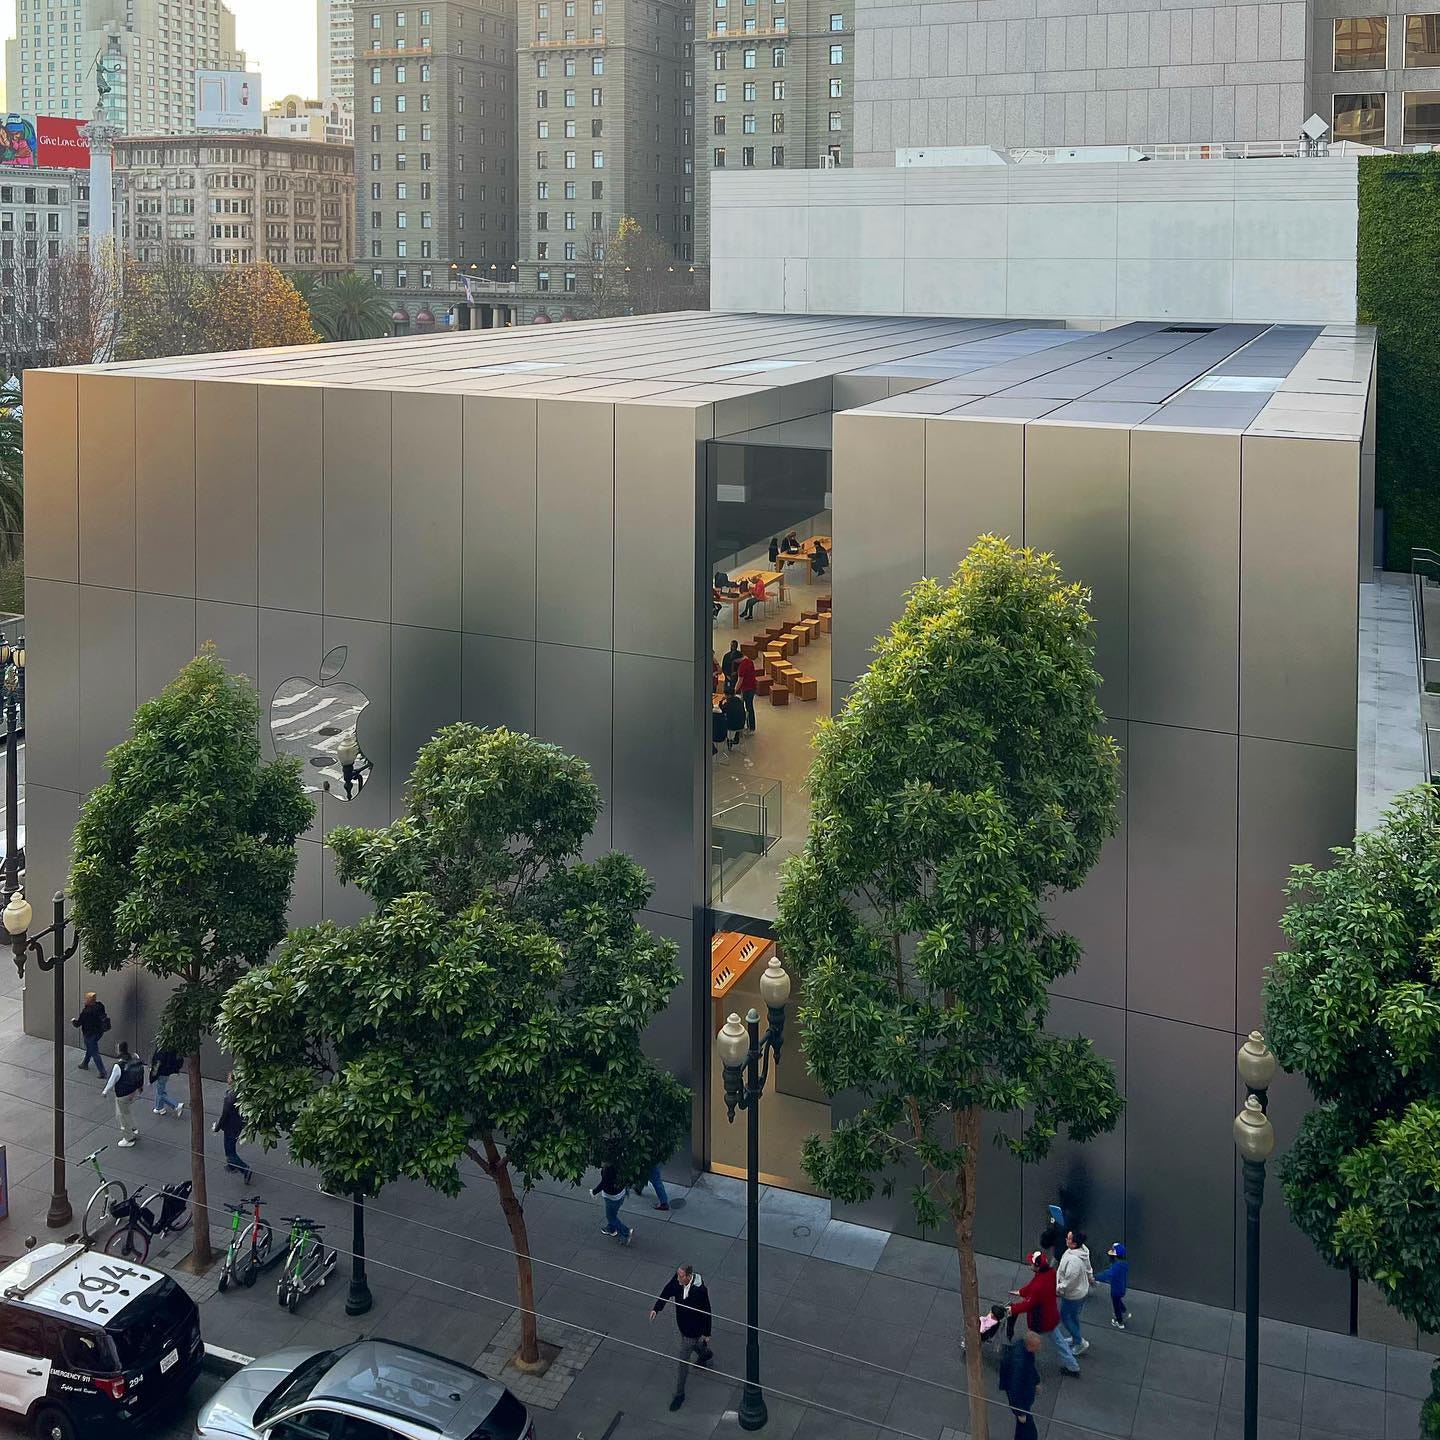 Apple Union Square, shot from an upper floor in a building across the street. The store interior is visible through narrow windows on the side of the building.